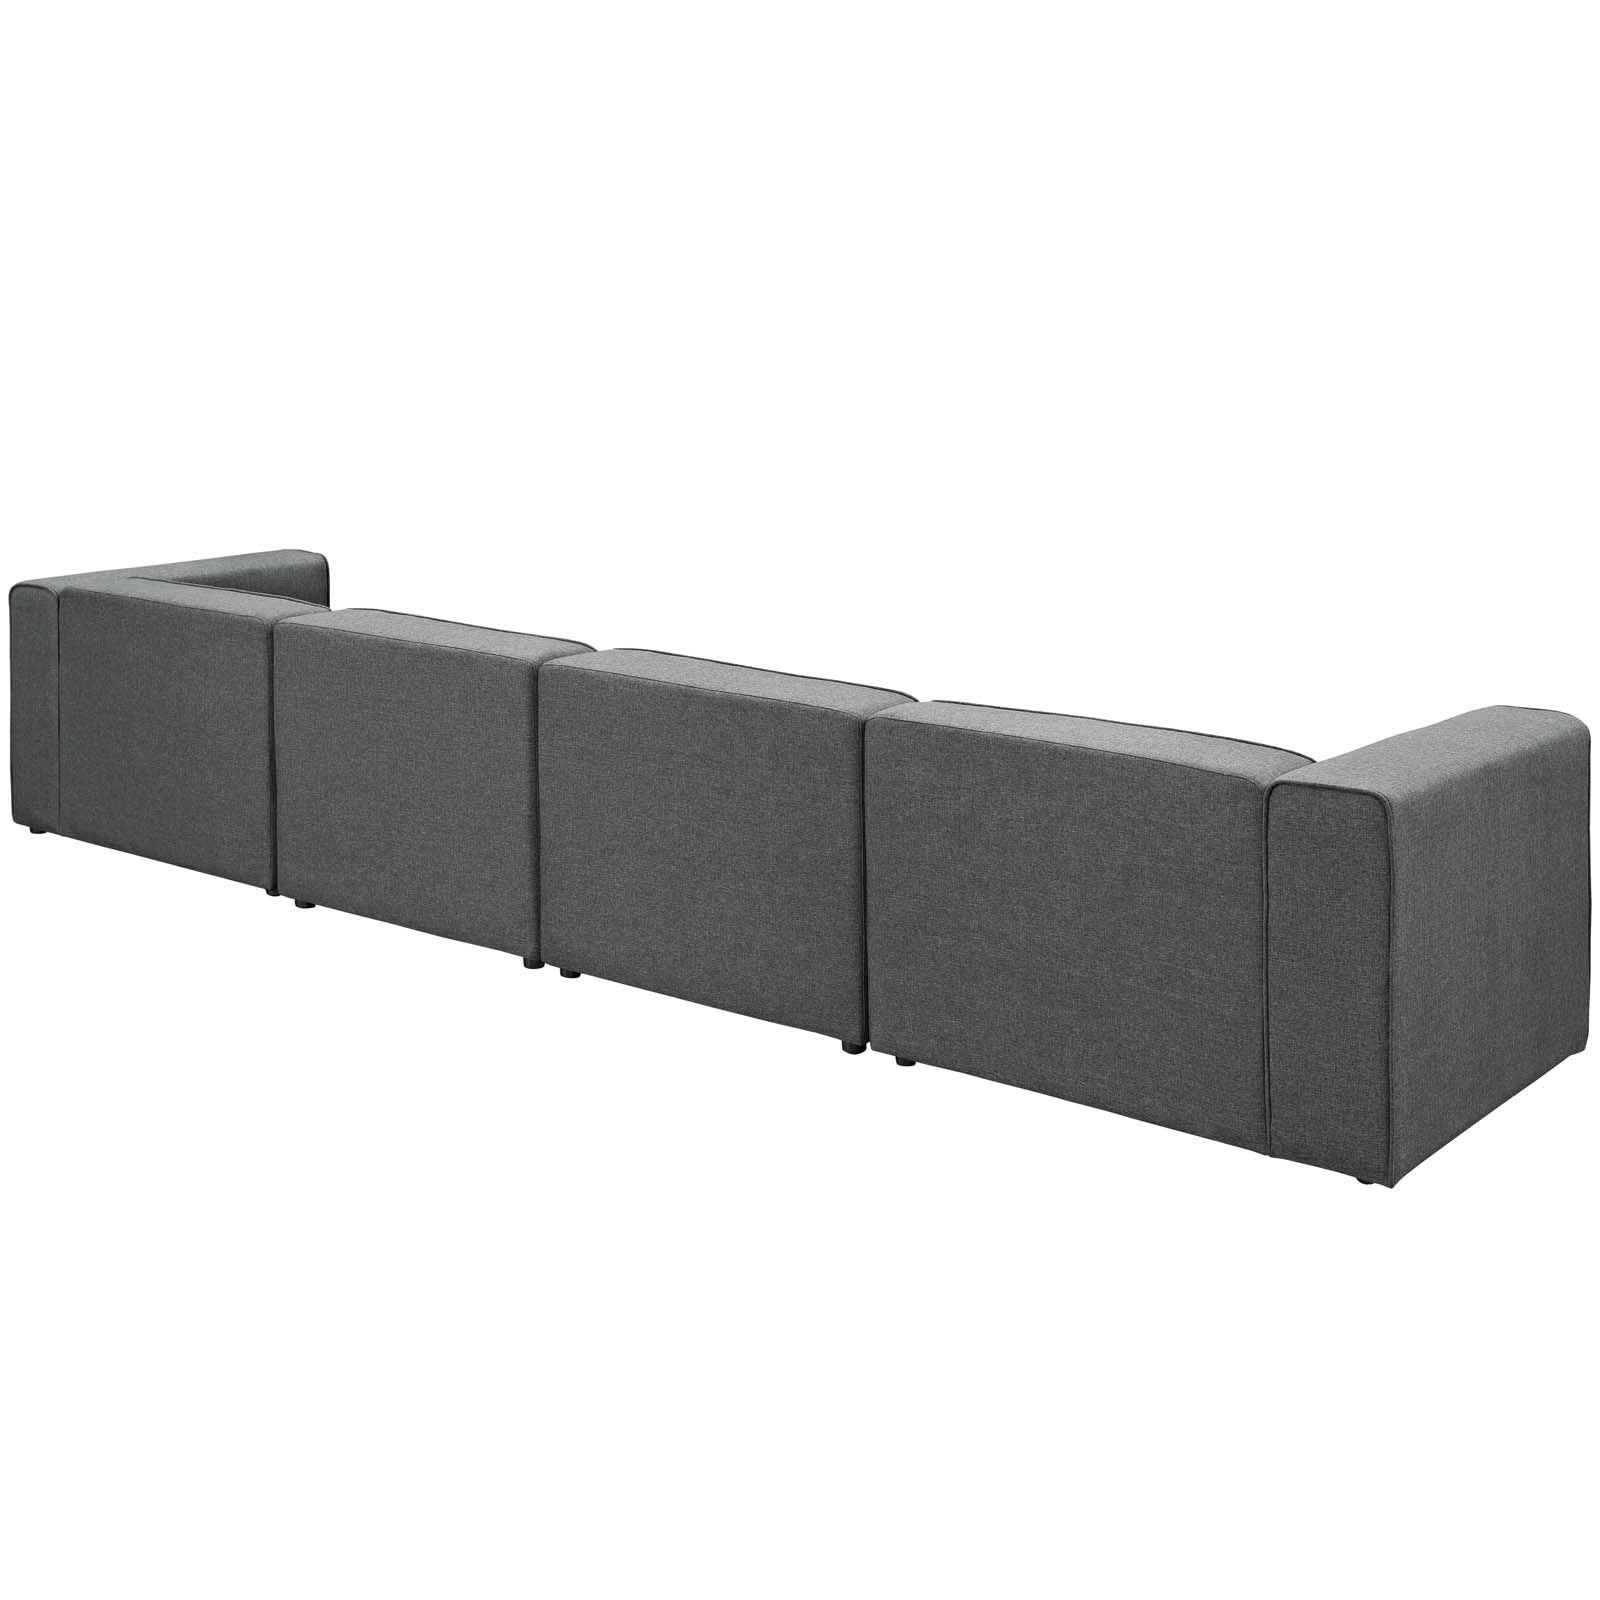 Modway Sofas & Couches - Mingle Upholstered Fabric Sectional Sofa Set Gray